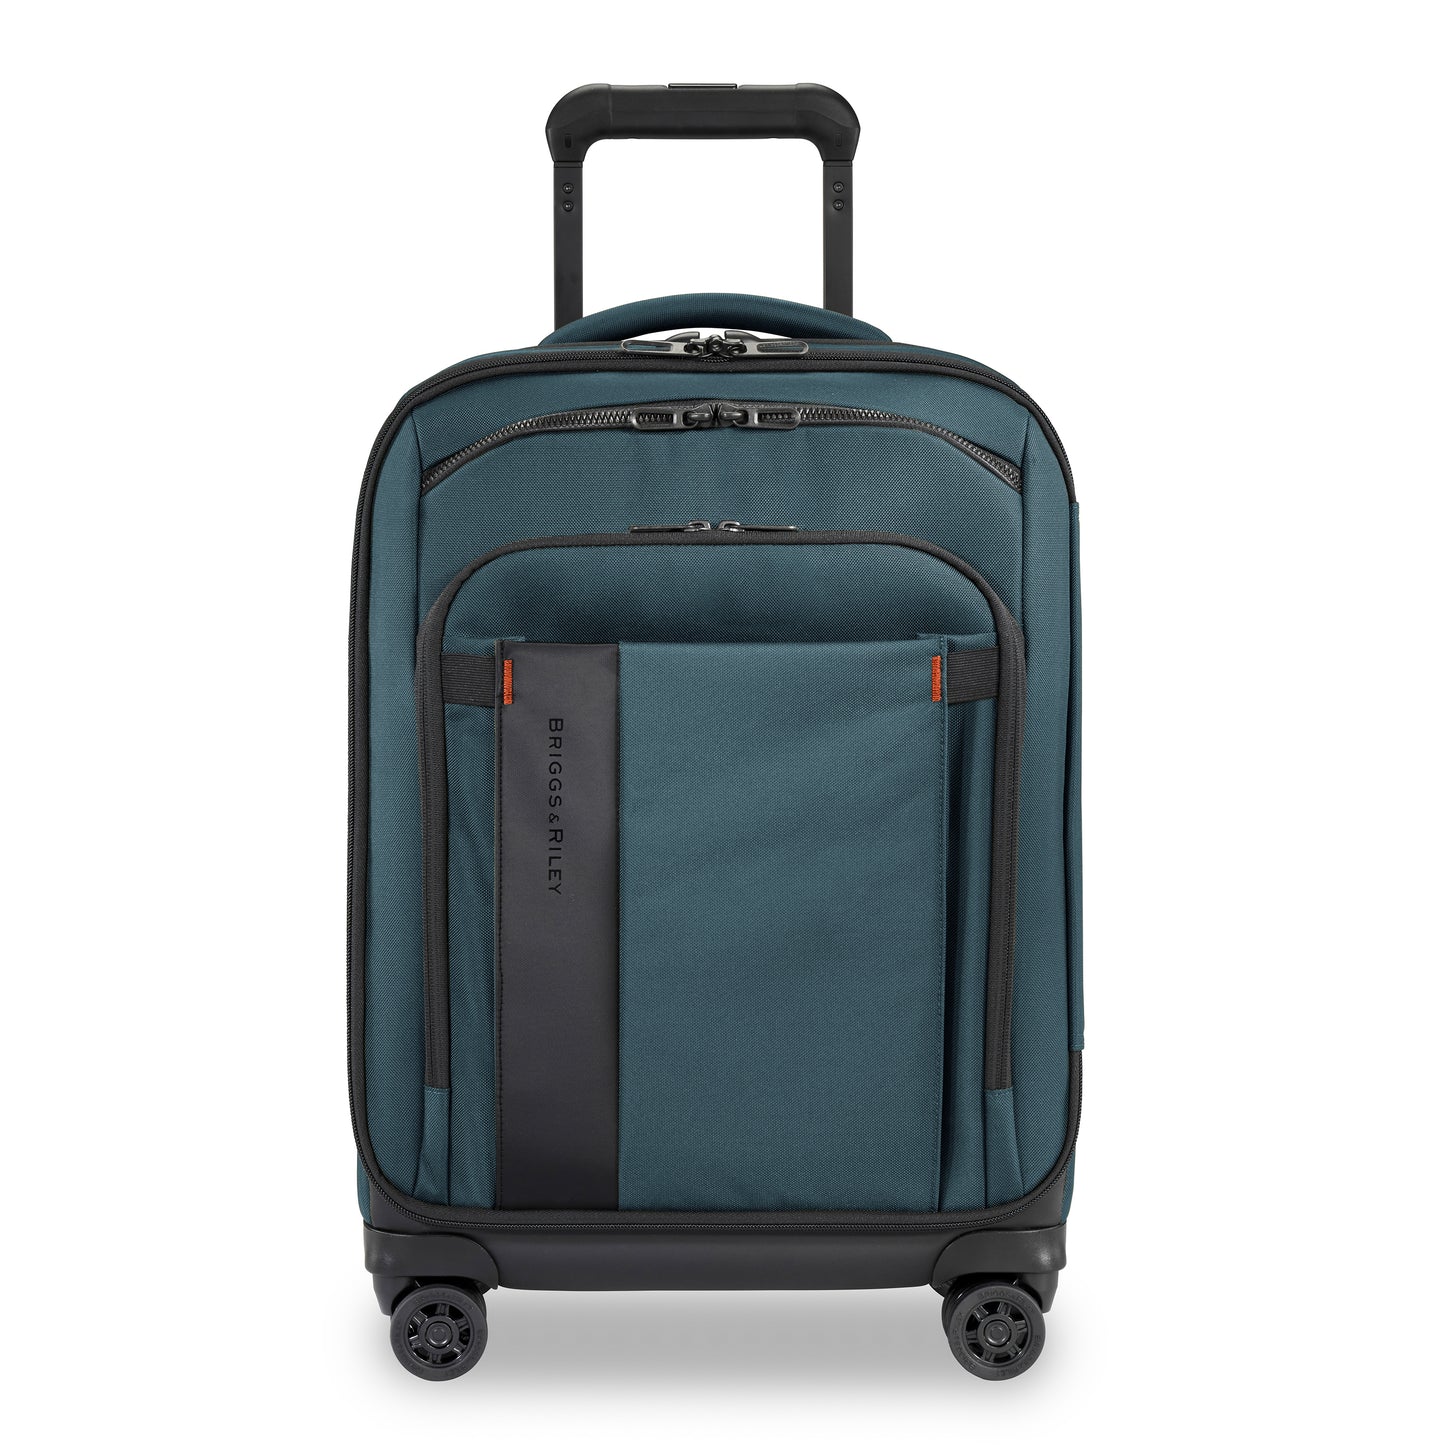 Briggs & Riley ZDX 21" Expandable Carry-On Spinner